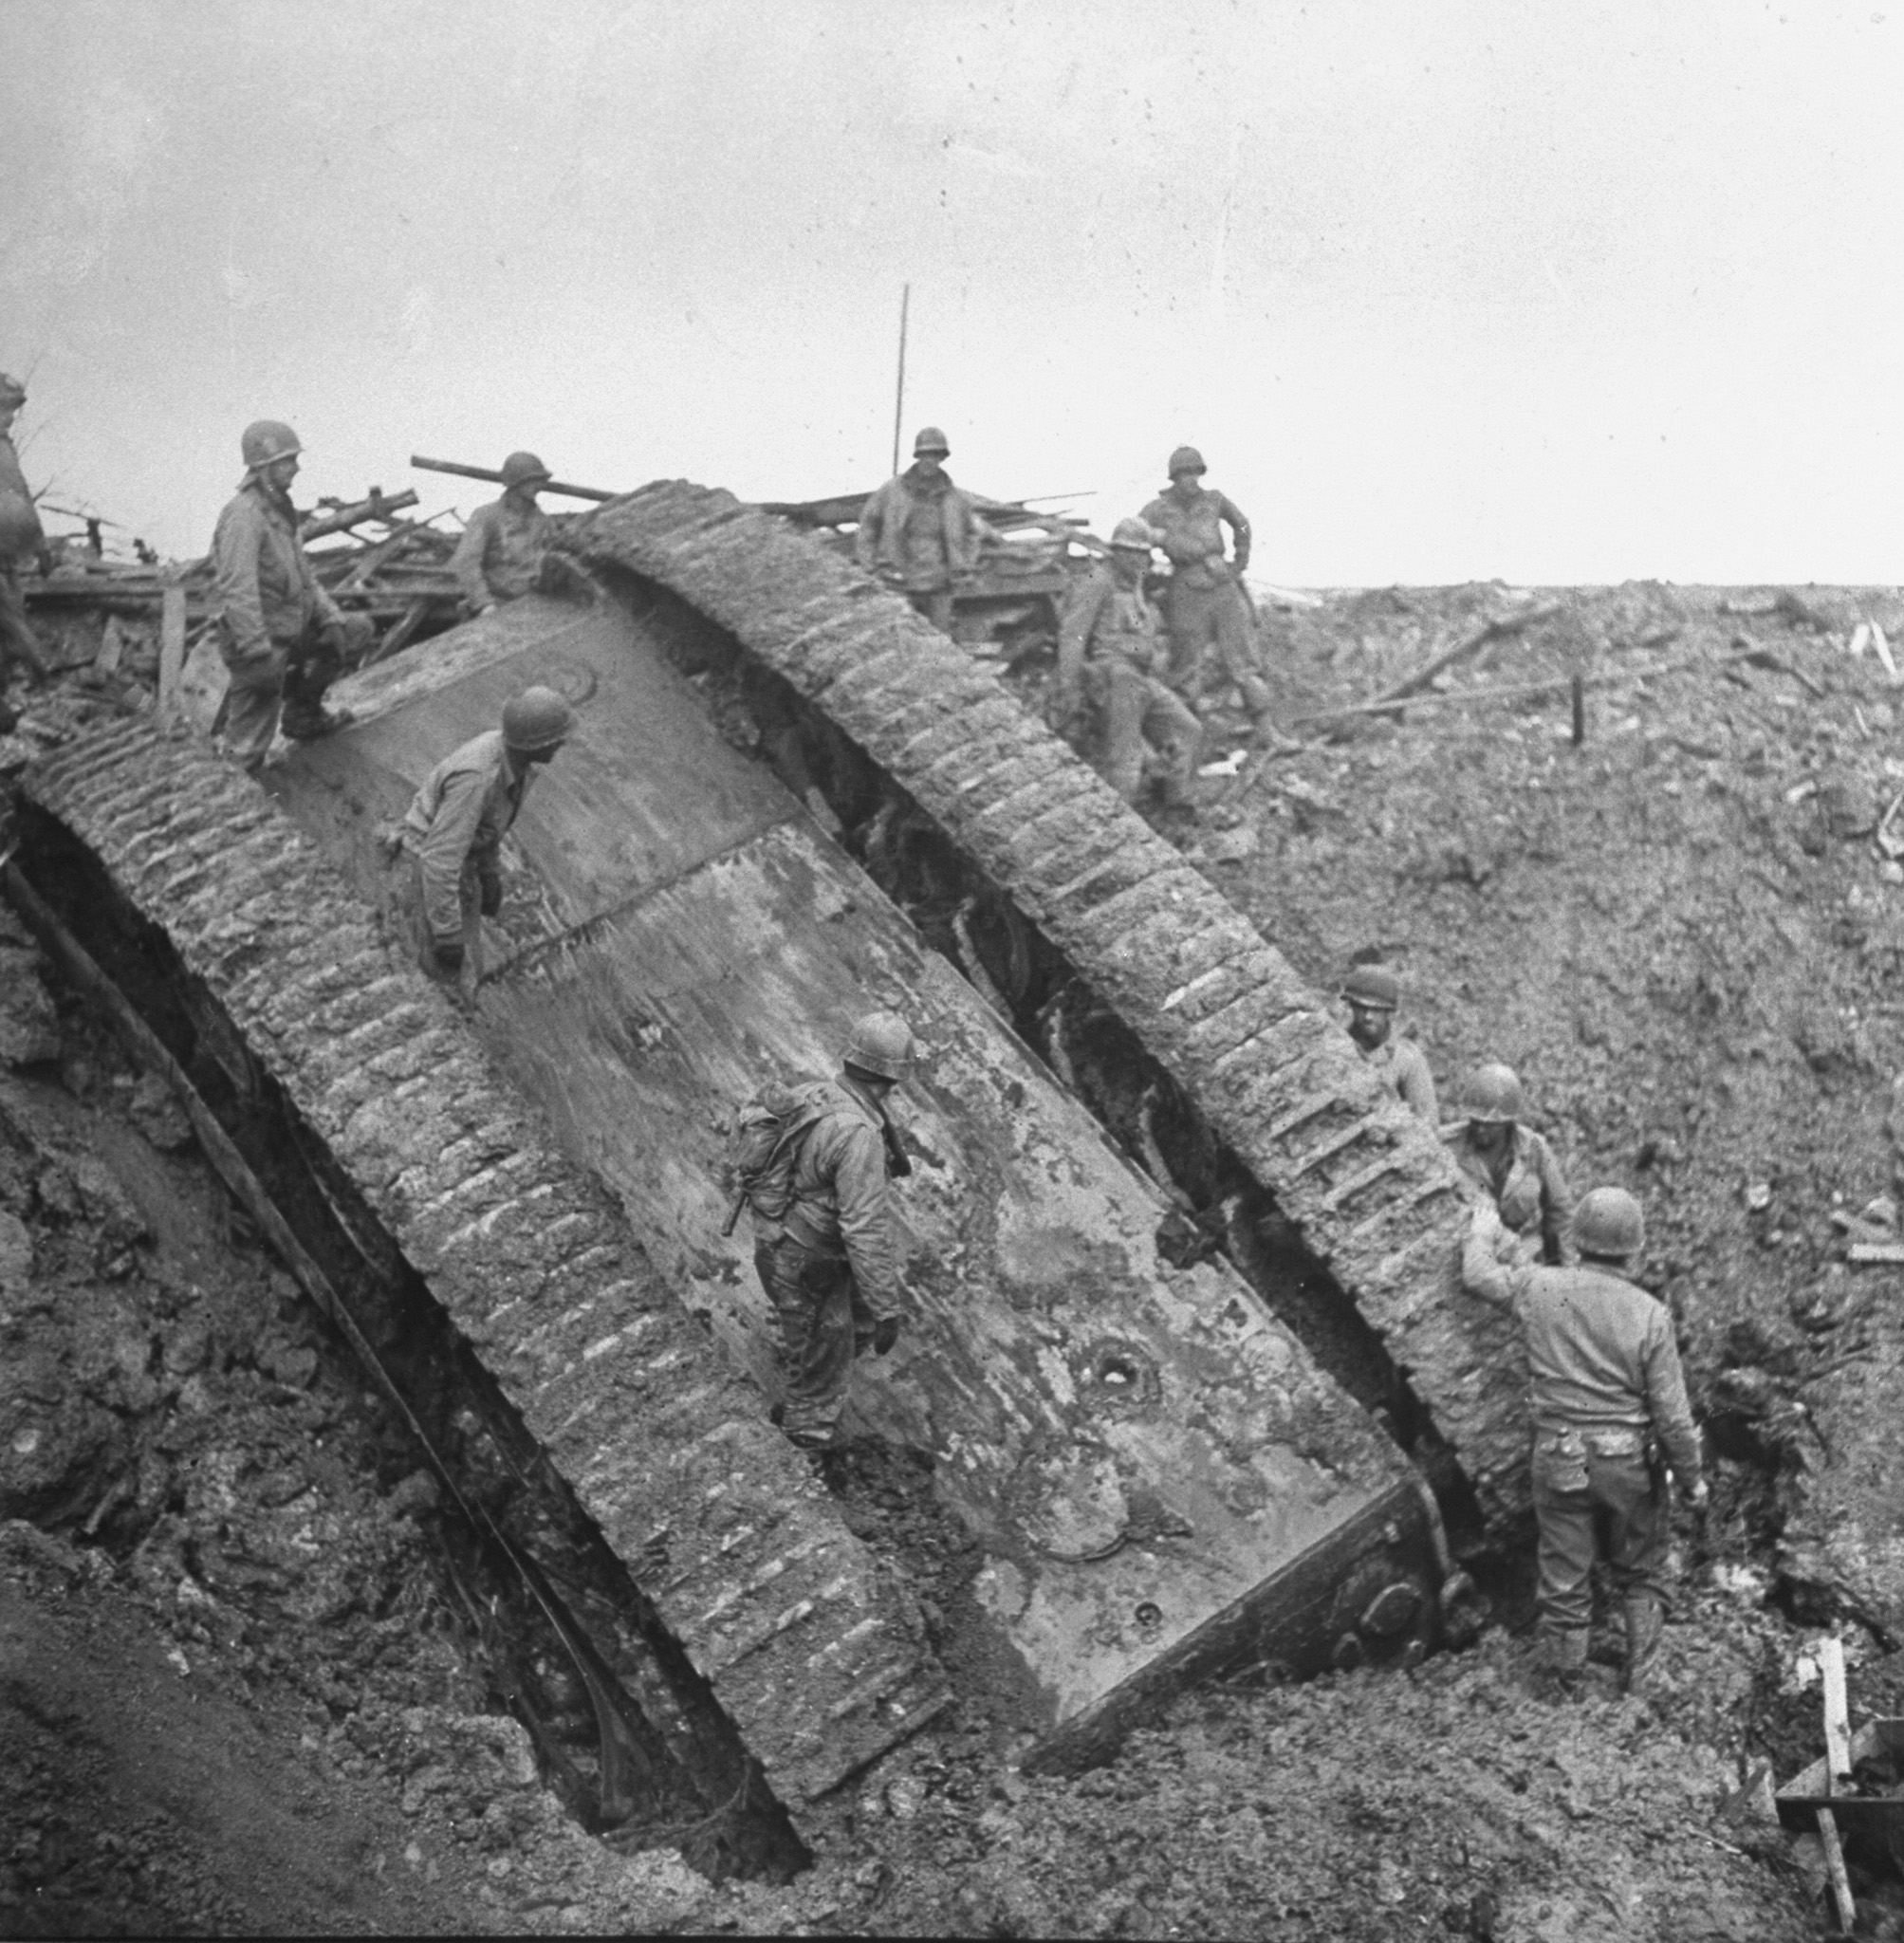 American GIs inspect an overturned German tank, after it toppled into a crater made by a bomb dropped right in front of it by an Allied plane, December 1944.